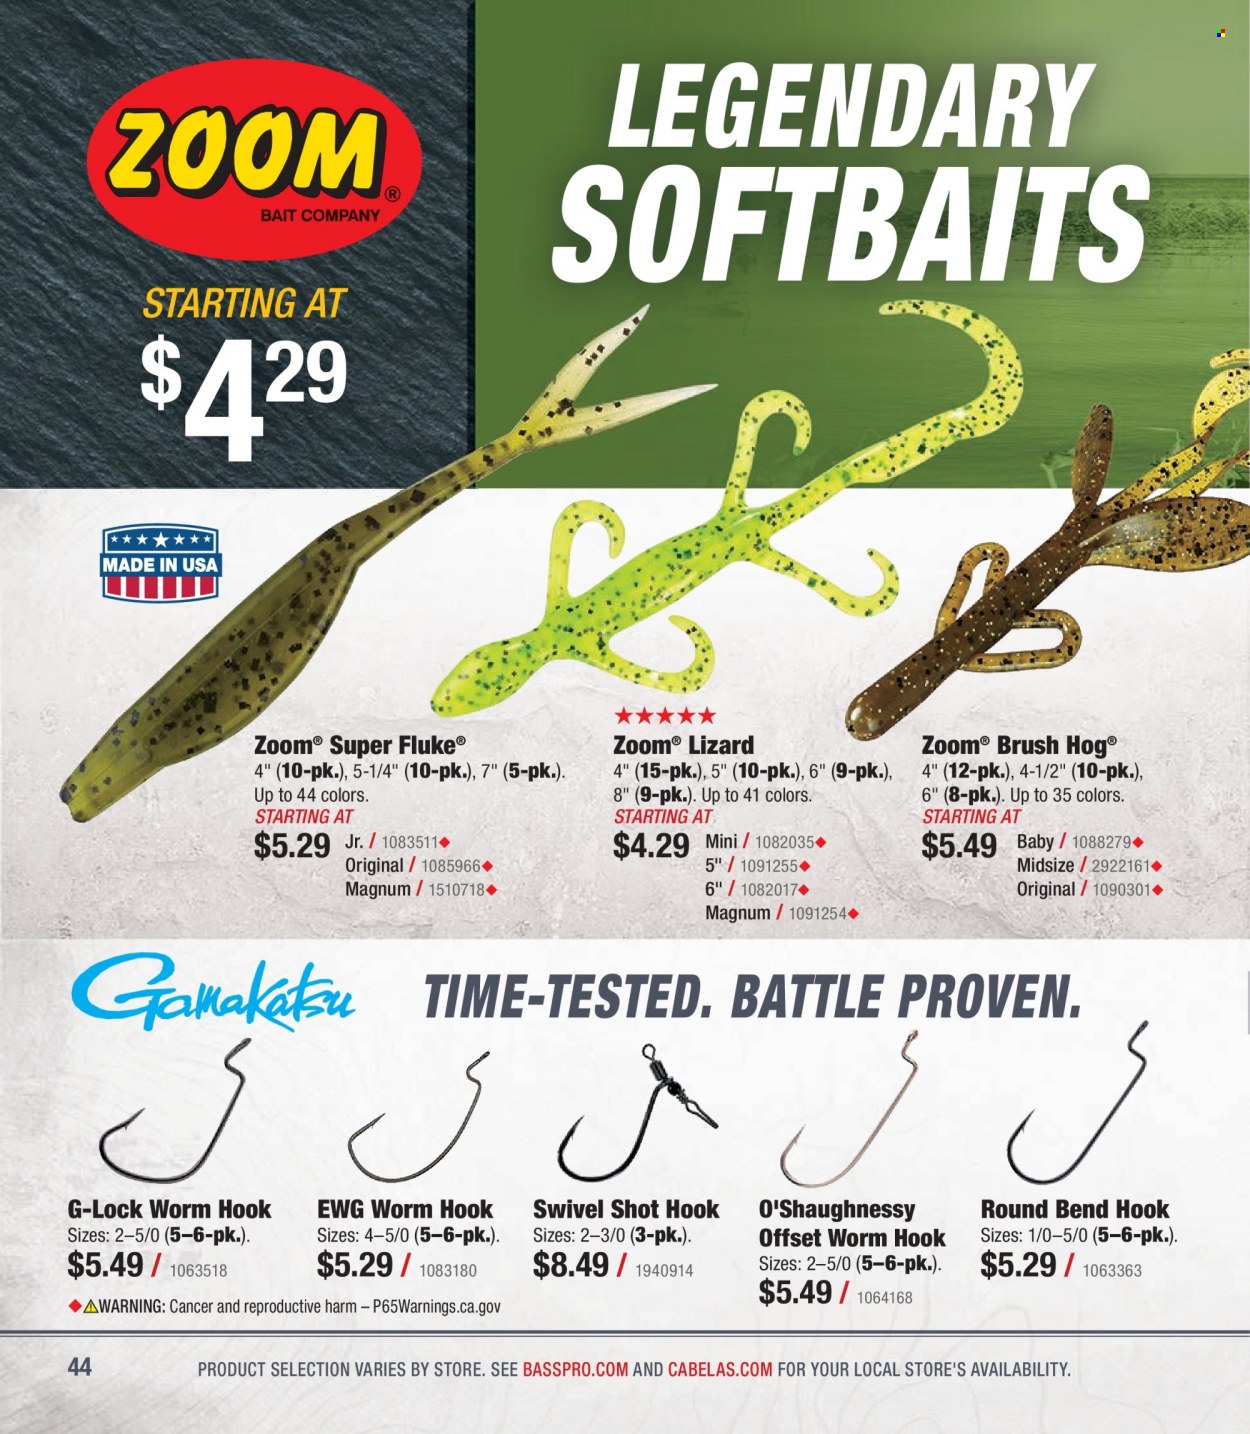 Bass Pro Shops flyer . Page 44.